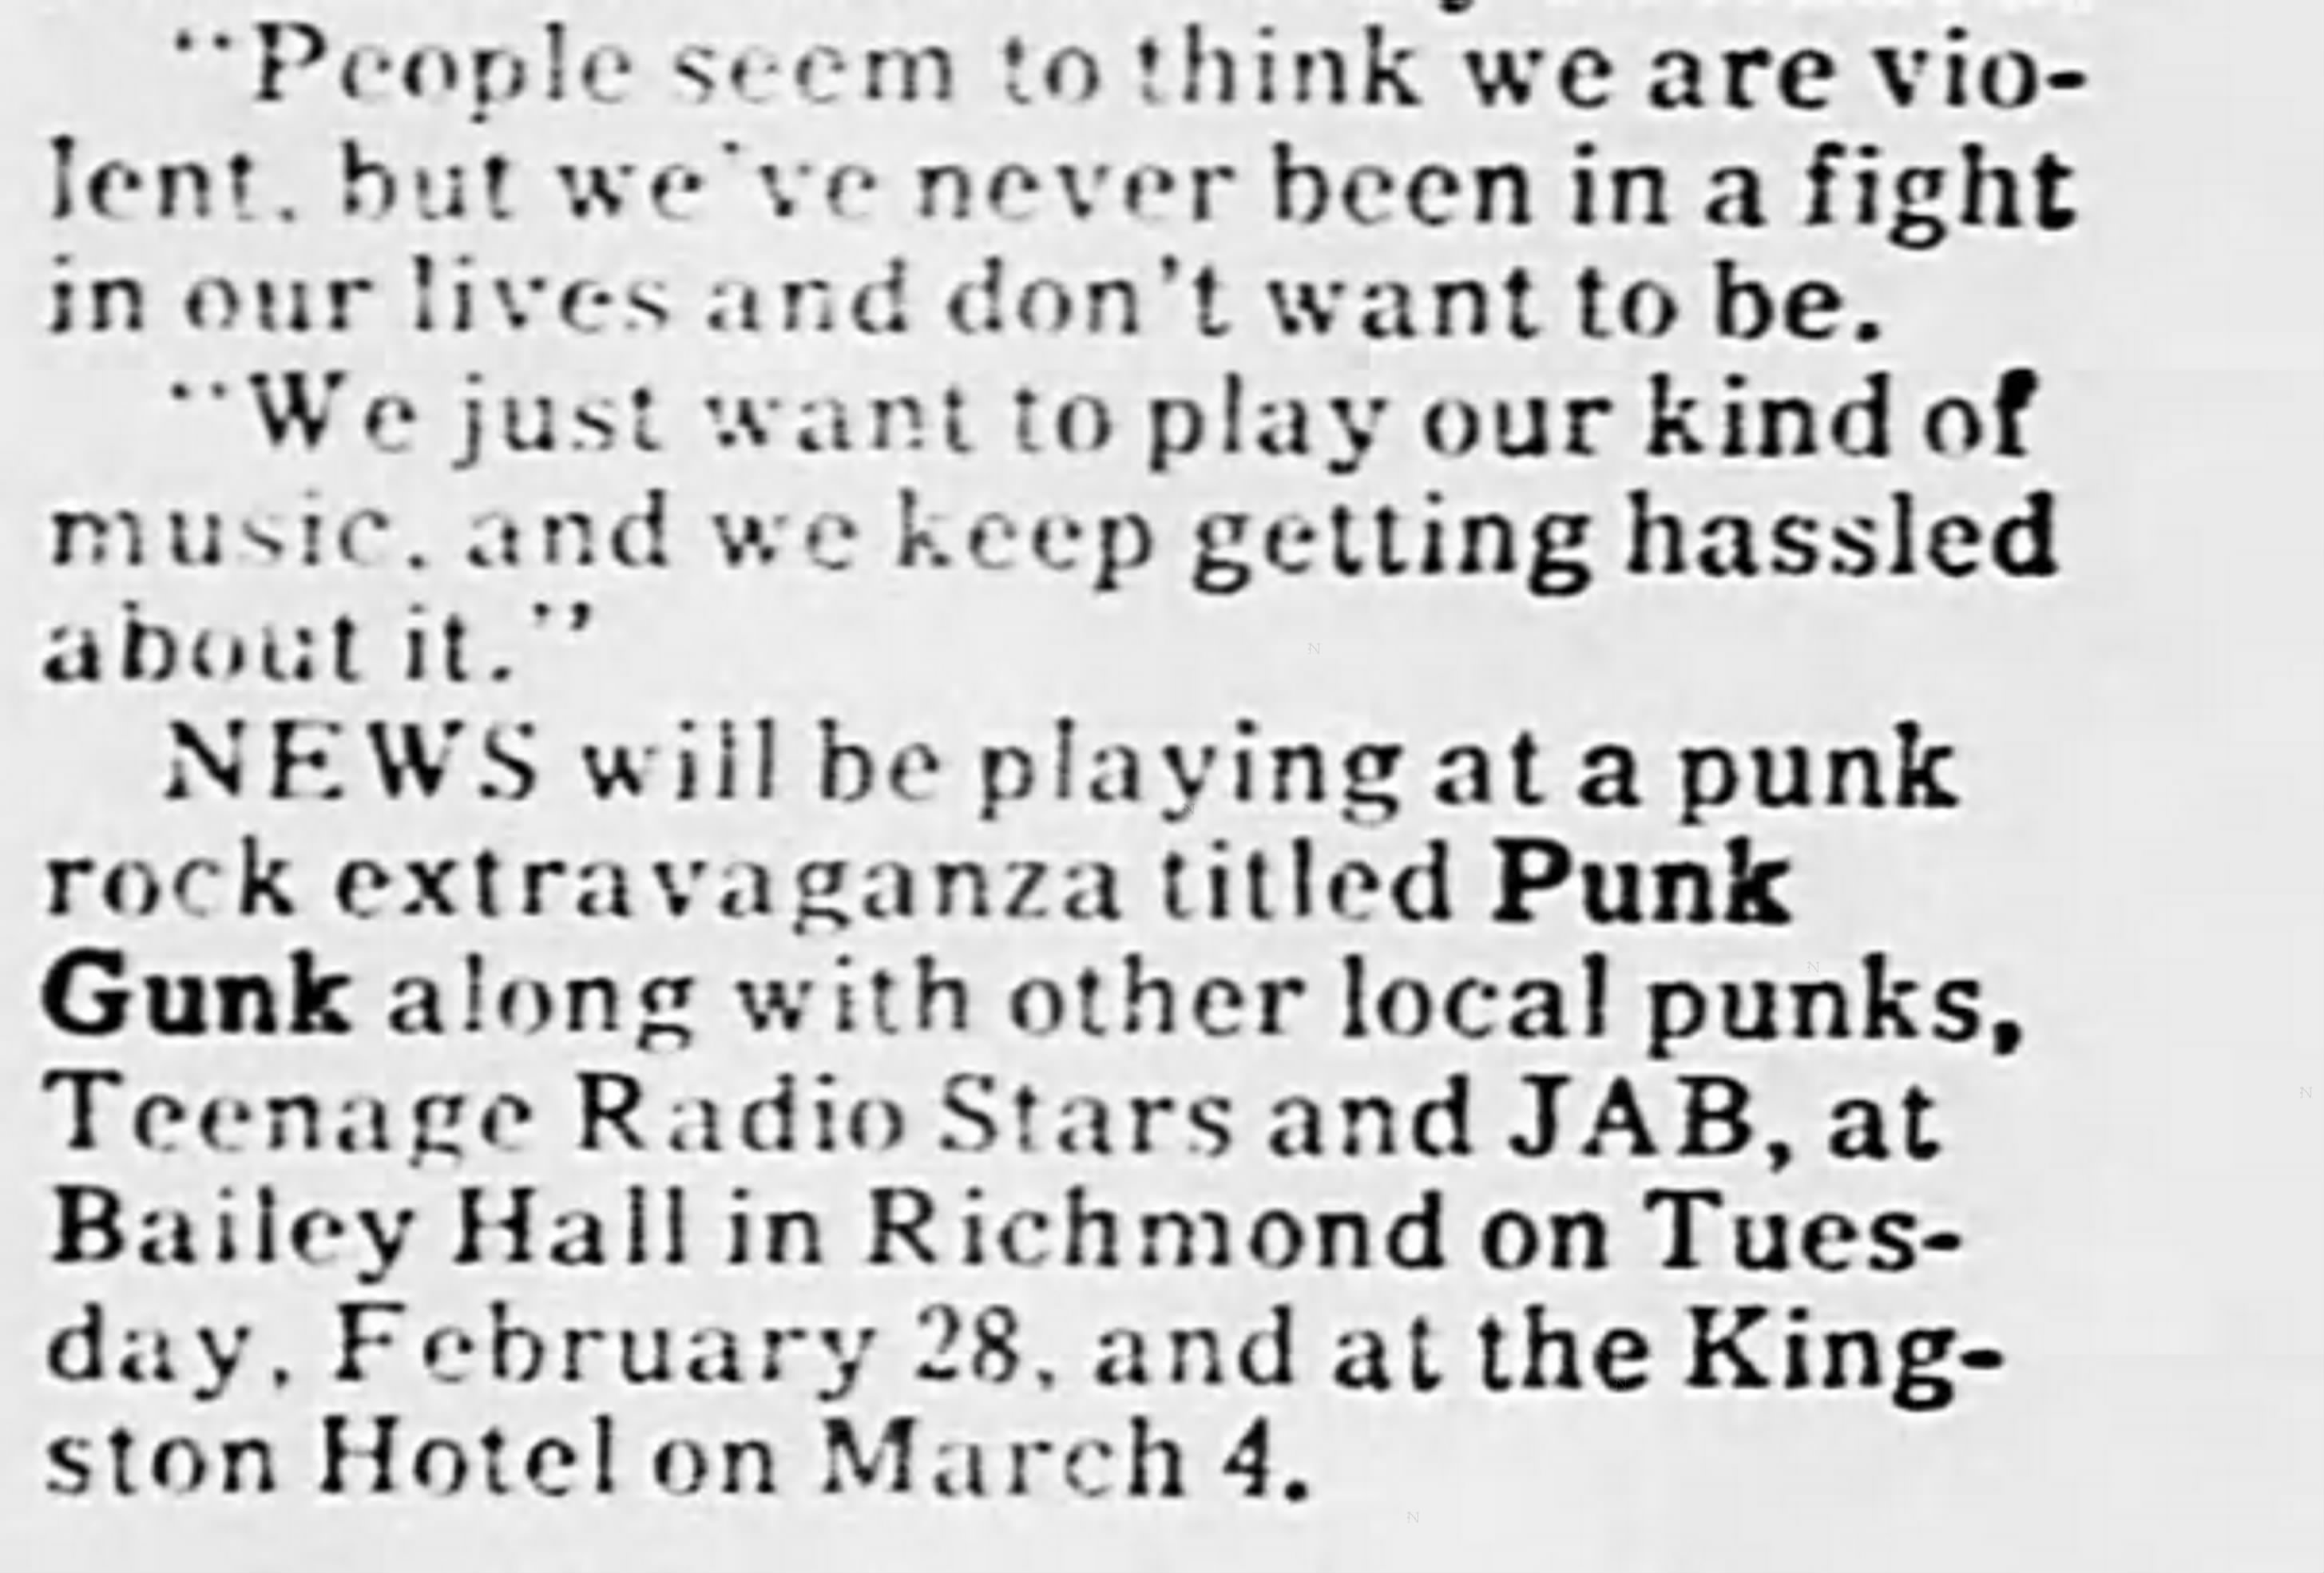 Clipping from the Age, 17 February 1978